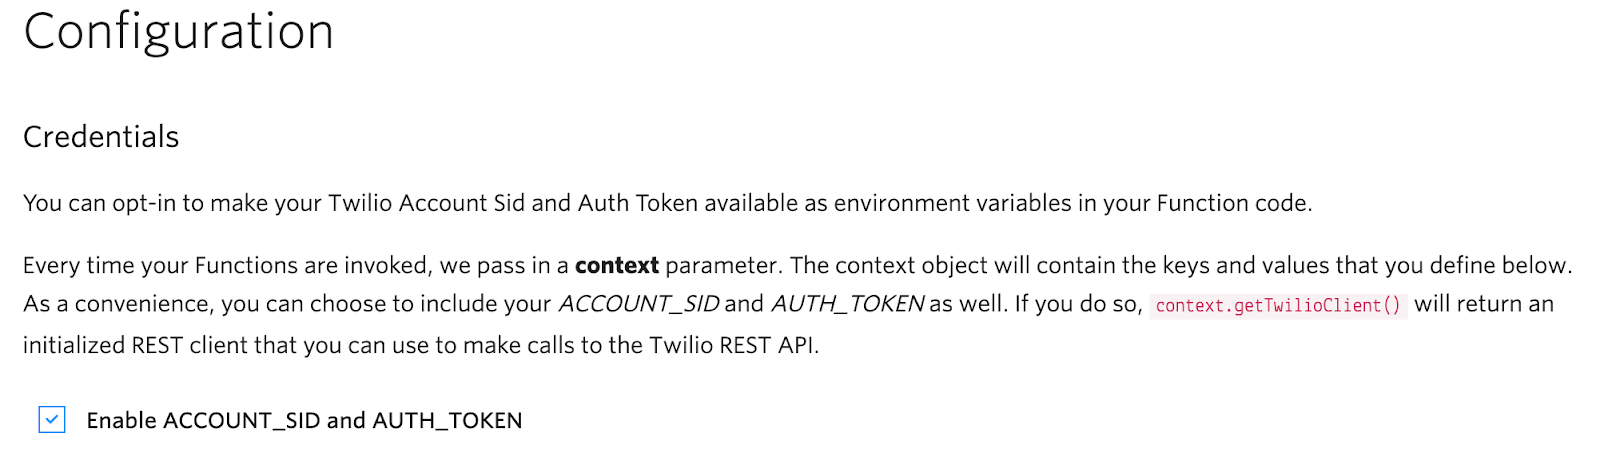 The configuration section that allows you to check a box to enable ACCOUNT_SID and AUTH_TOKEN